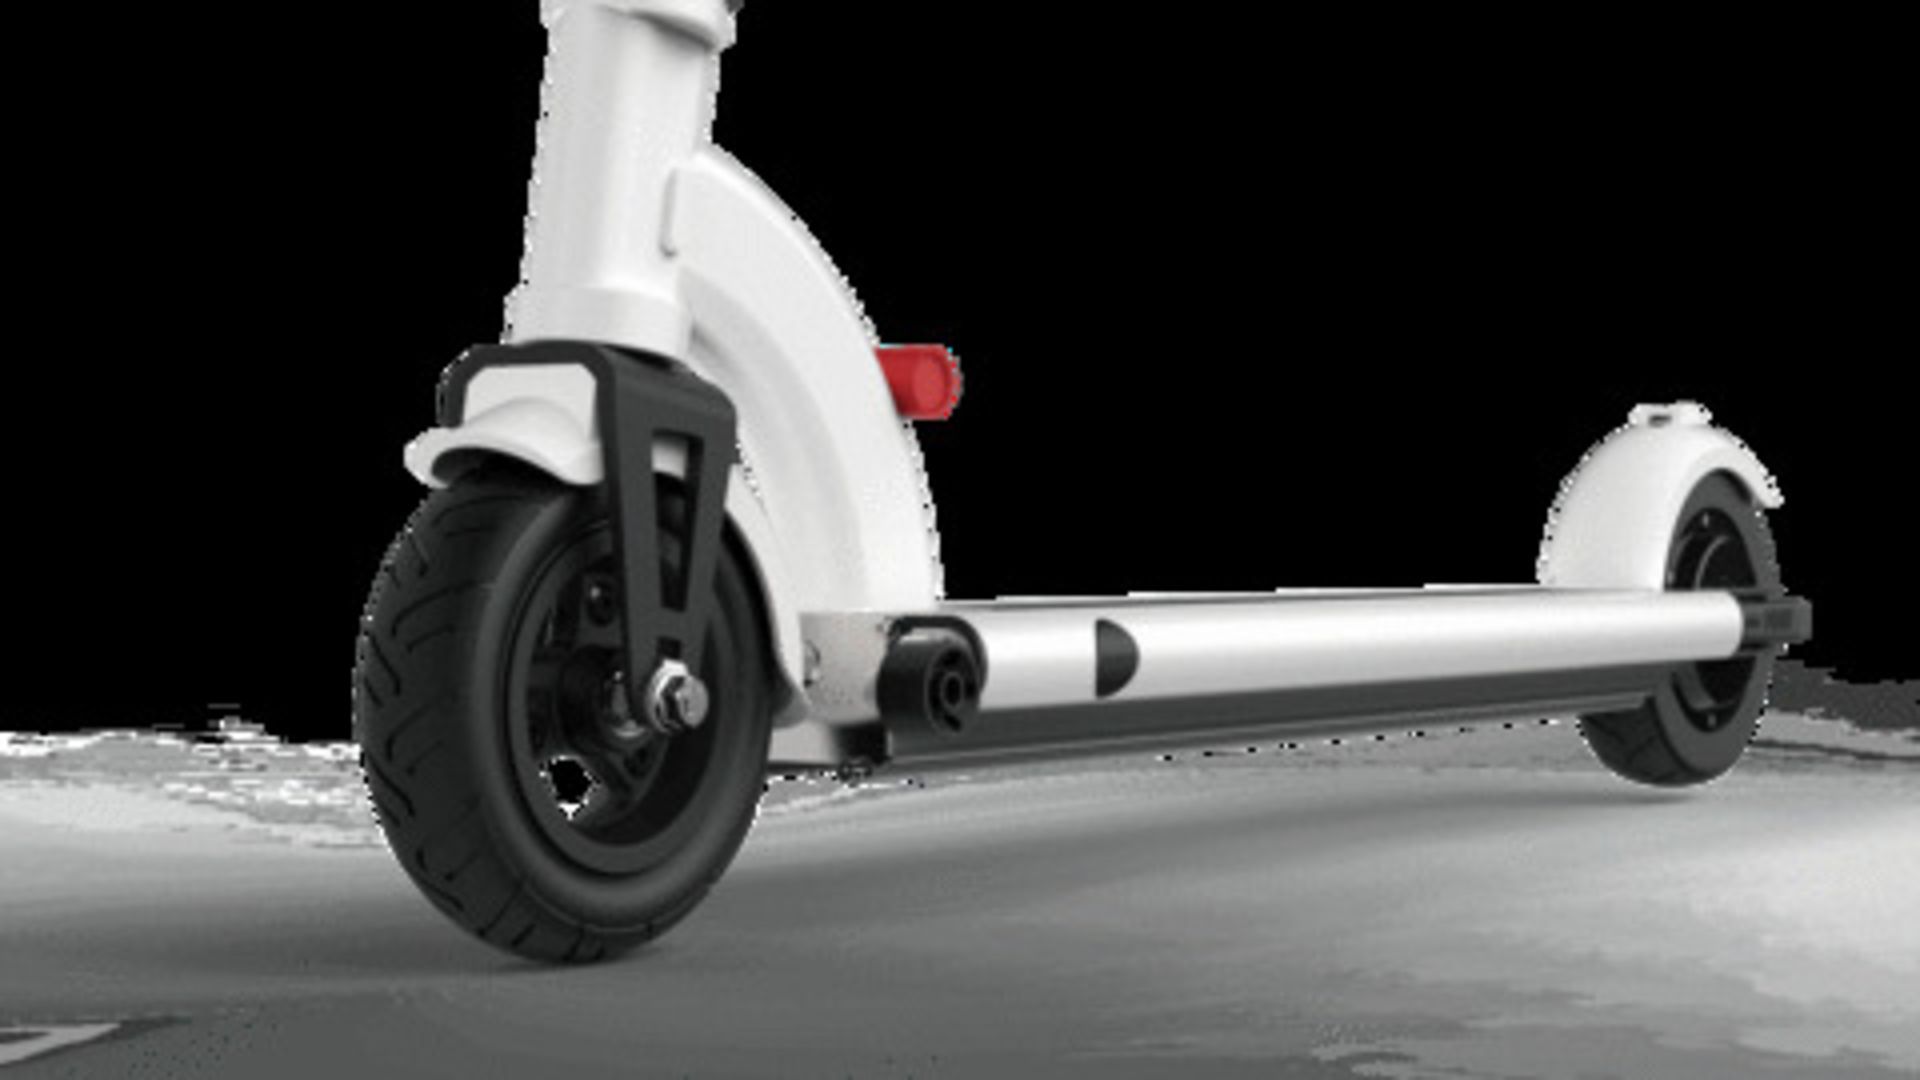 BRAND NEW NOKIM MINI FORCE WHITE 1'SELECTRIC SCOOTER (WHITE) RRP £559 - Image 2 of 2